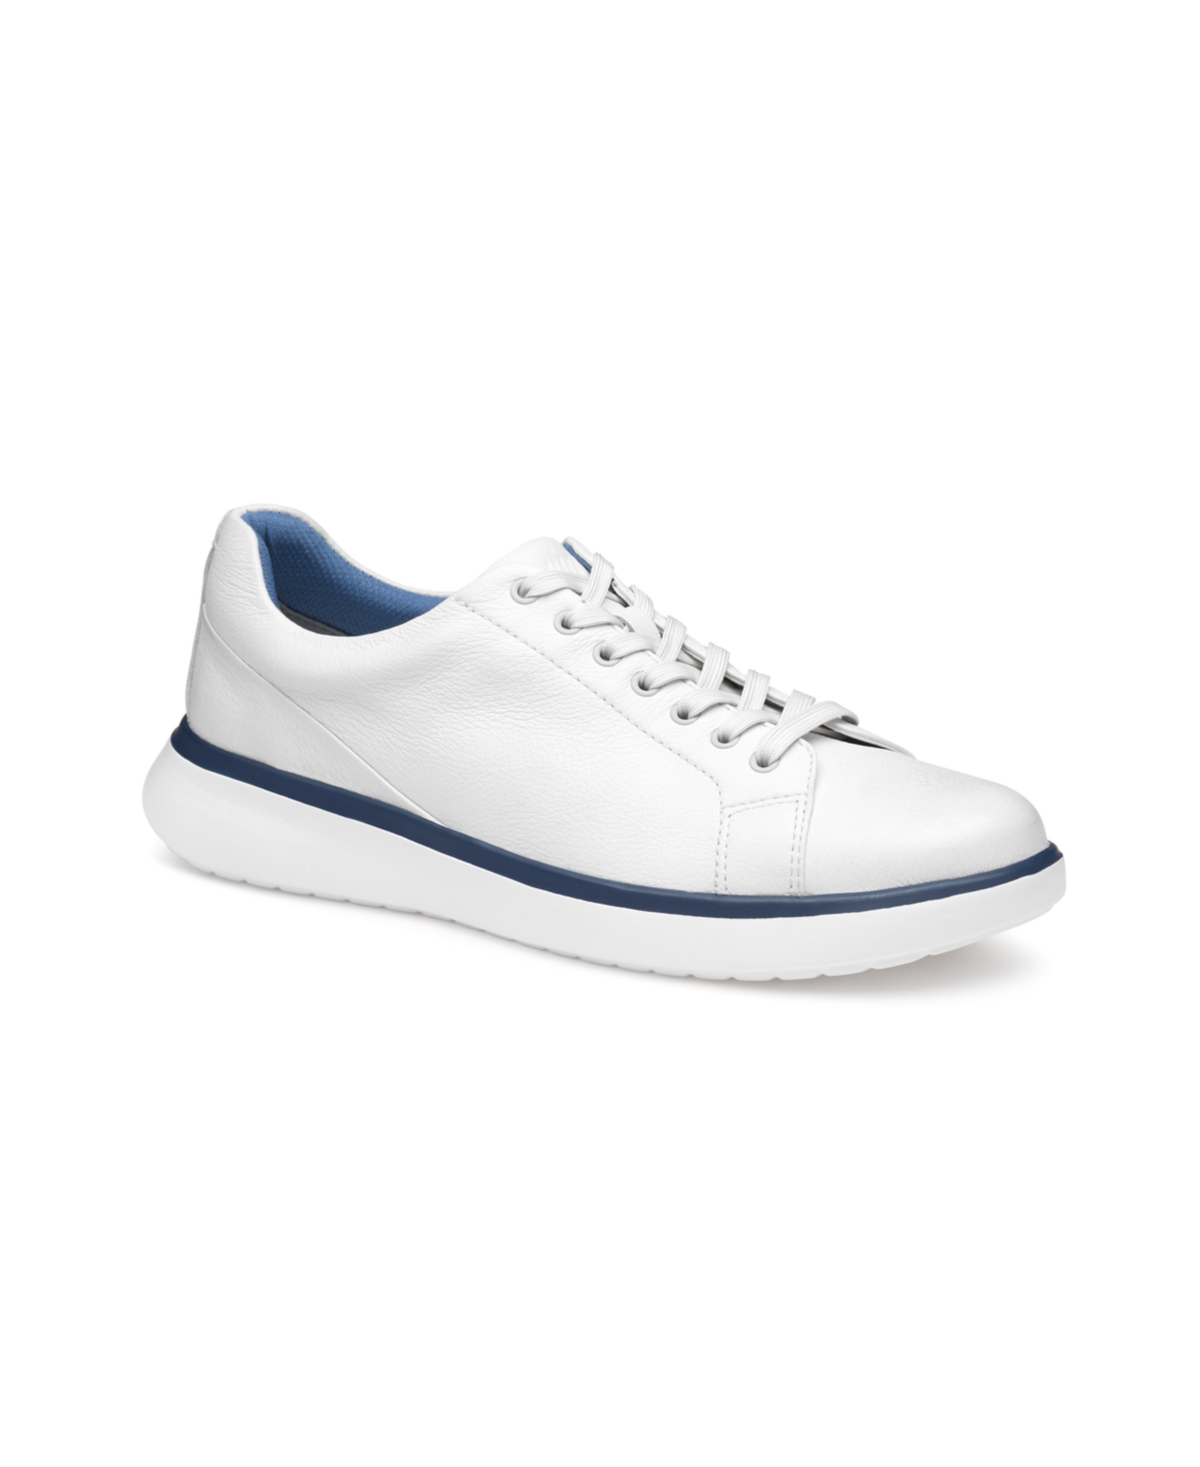 Men's Oasis Lace-To-Toe Sneakers - White